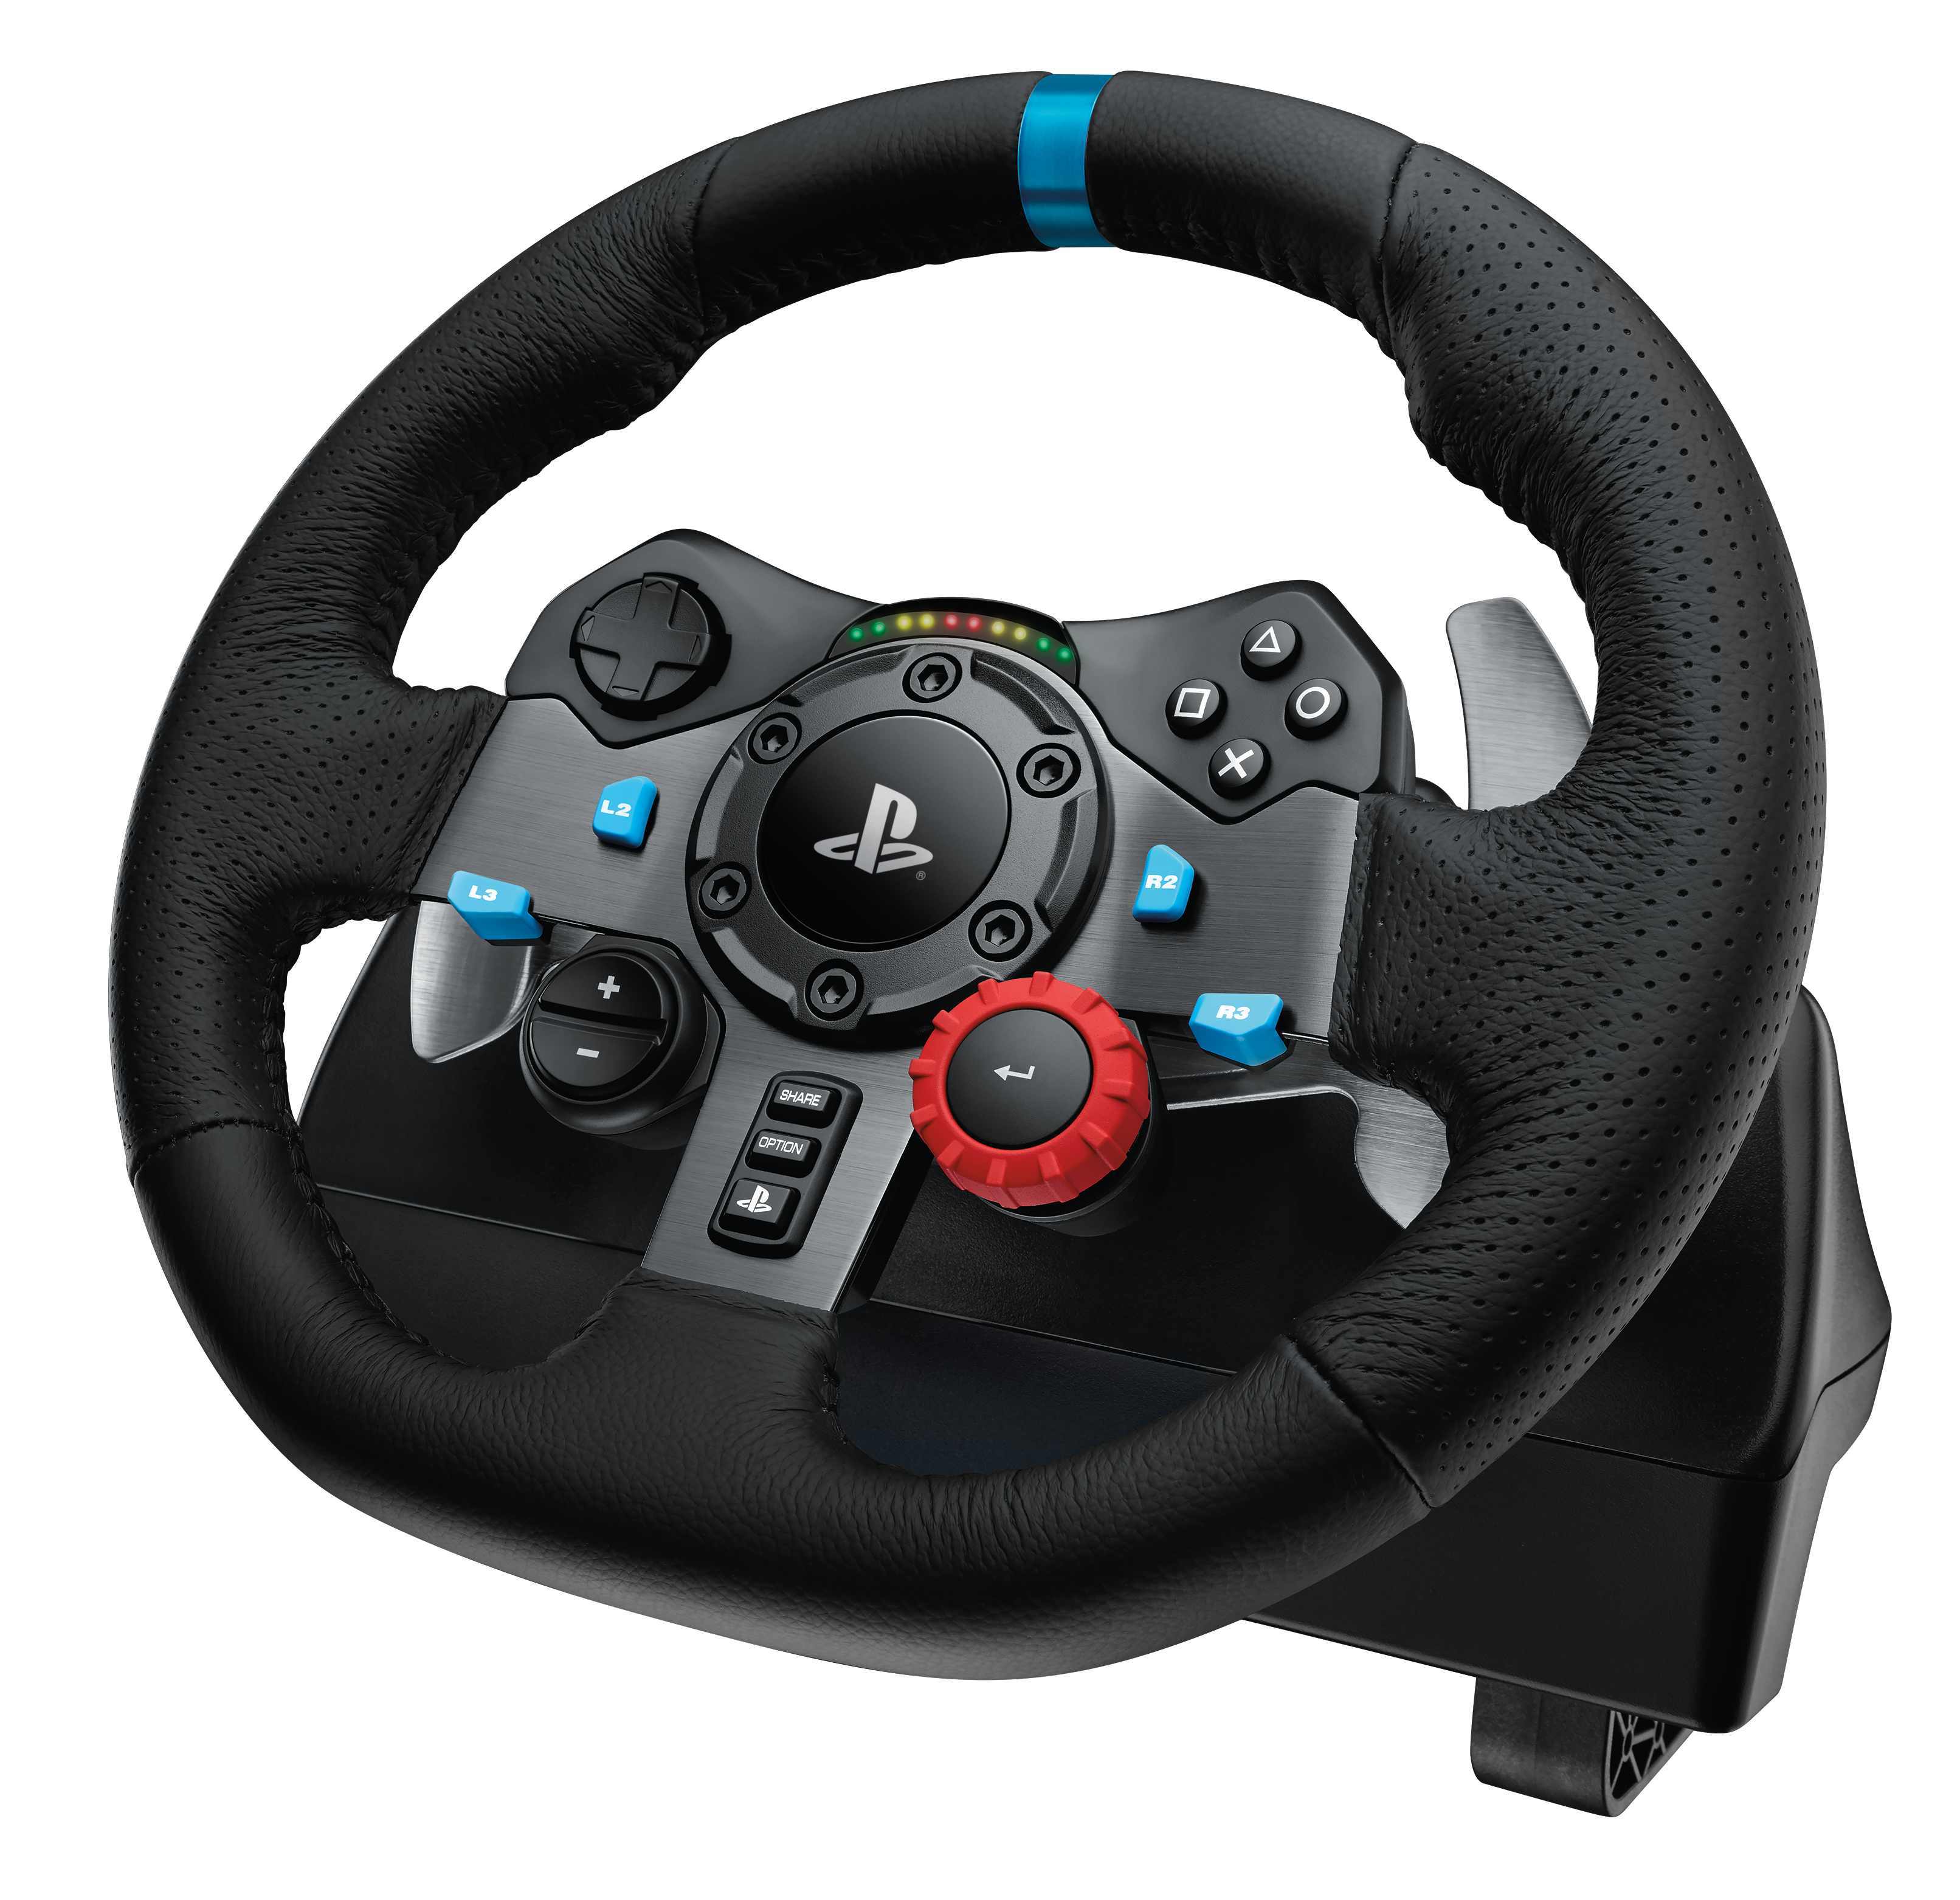 møbel Virus forum Logitech G Introduces Force Feedback Racing Wheel for the PlayStation®4 |  Business Wire